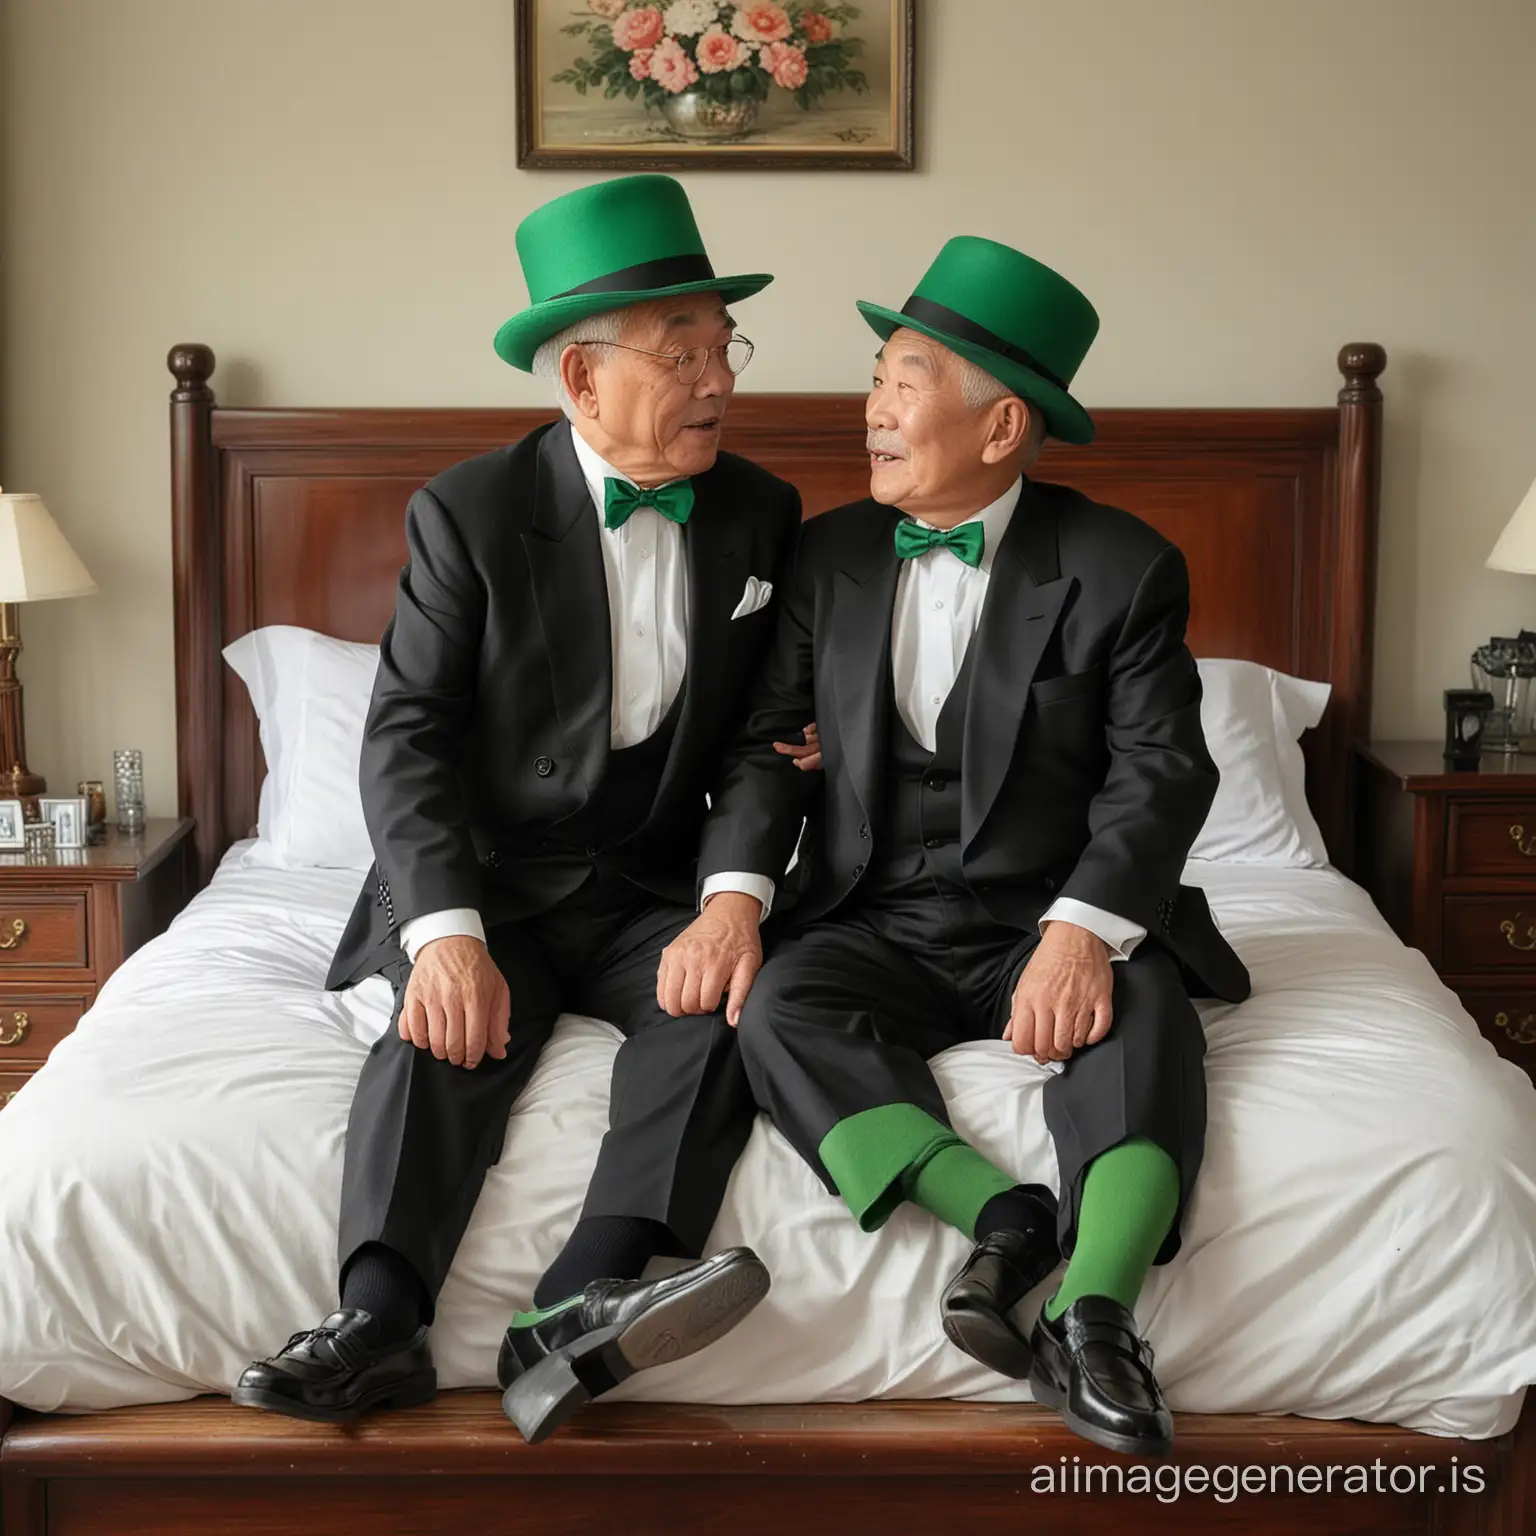 Two Chinese fat elderly men, both 80 years old, shot height, wearing green hats, black tuxedos, green bowties, green socks, black loafers, black hair, kissing on a bed in the bedroom, full body shot, must show face